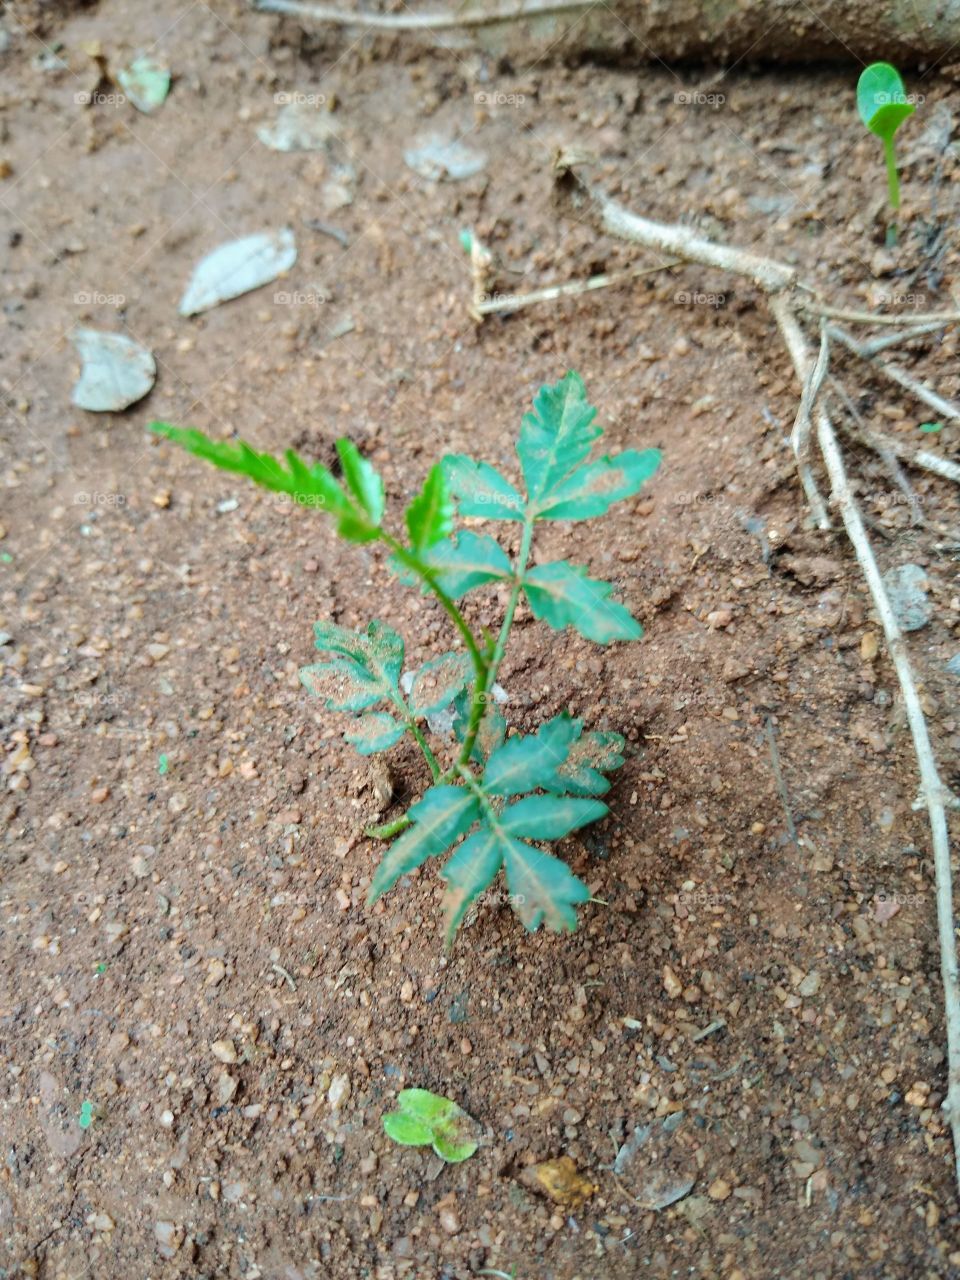 a small neem plant in my garden